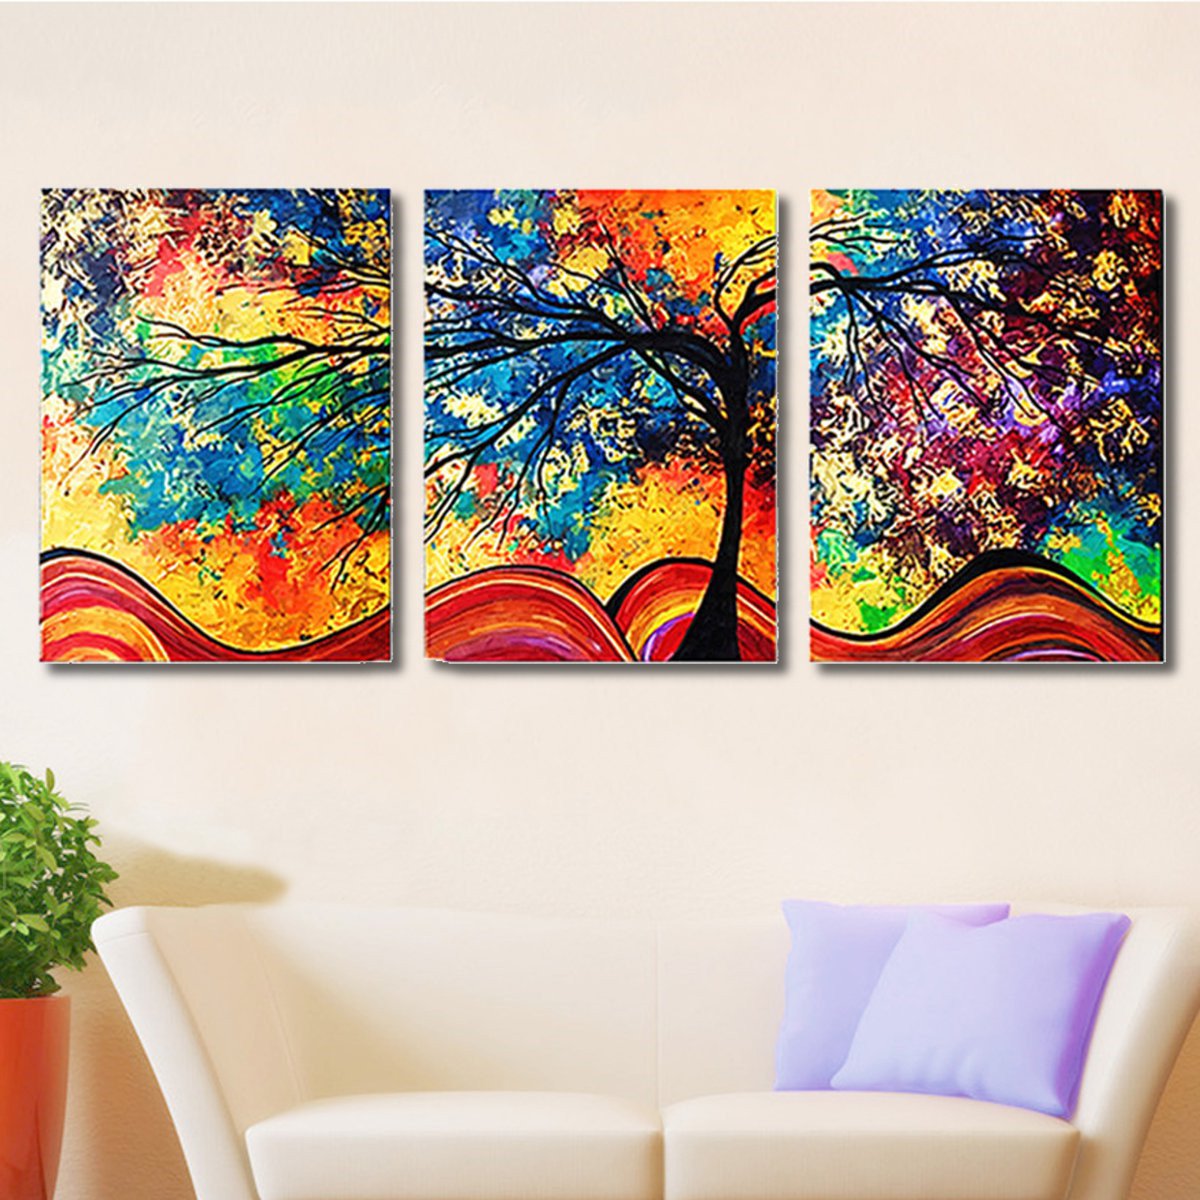 3Pcs-Colorful-Tree-HD-Canvas-Print-Paintings-Wall-Decorative-Print-Art-Pictures-FramedFrameless-Wall-1187263-3